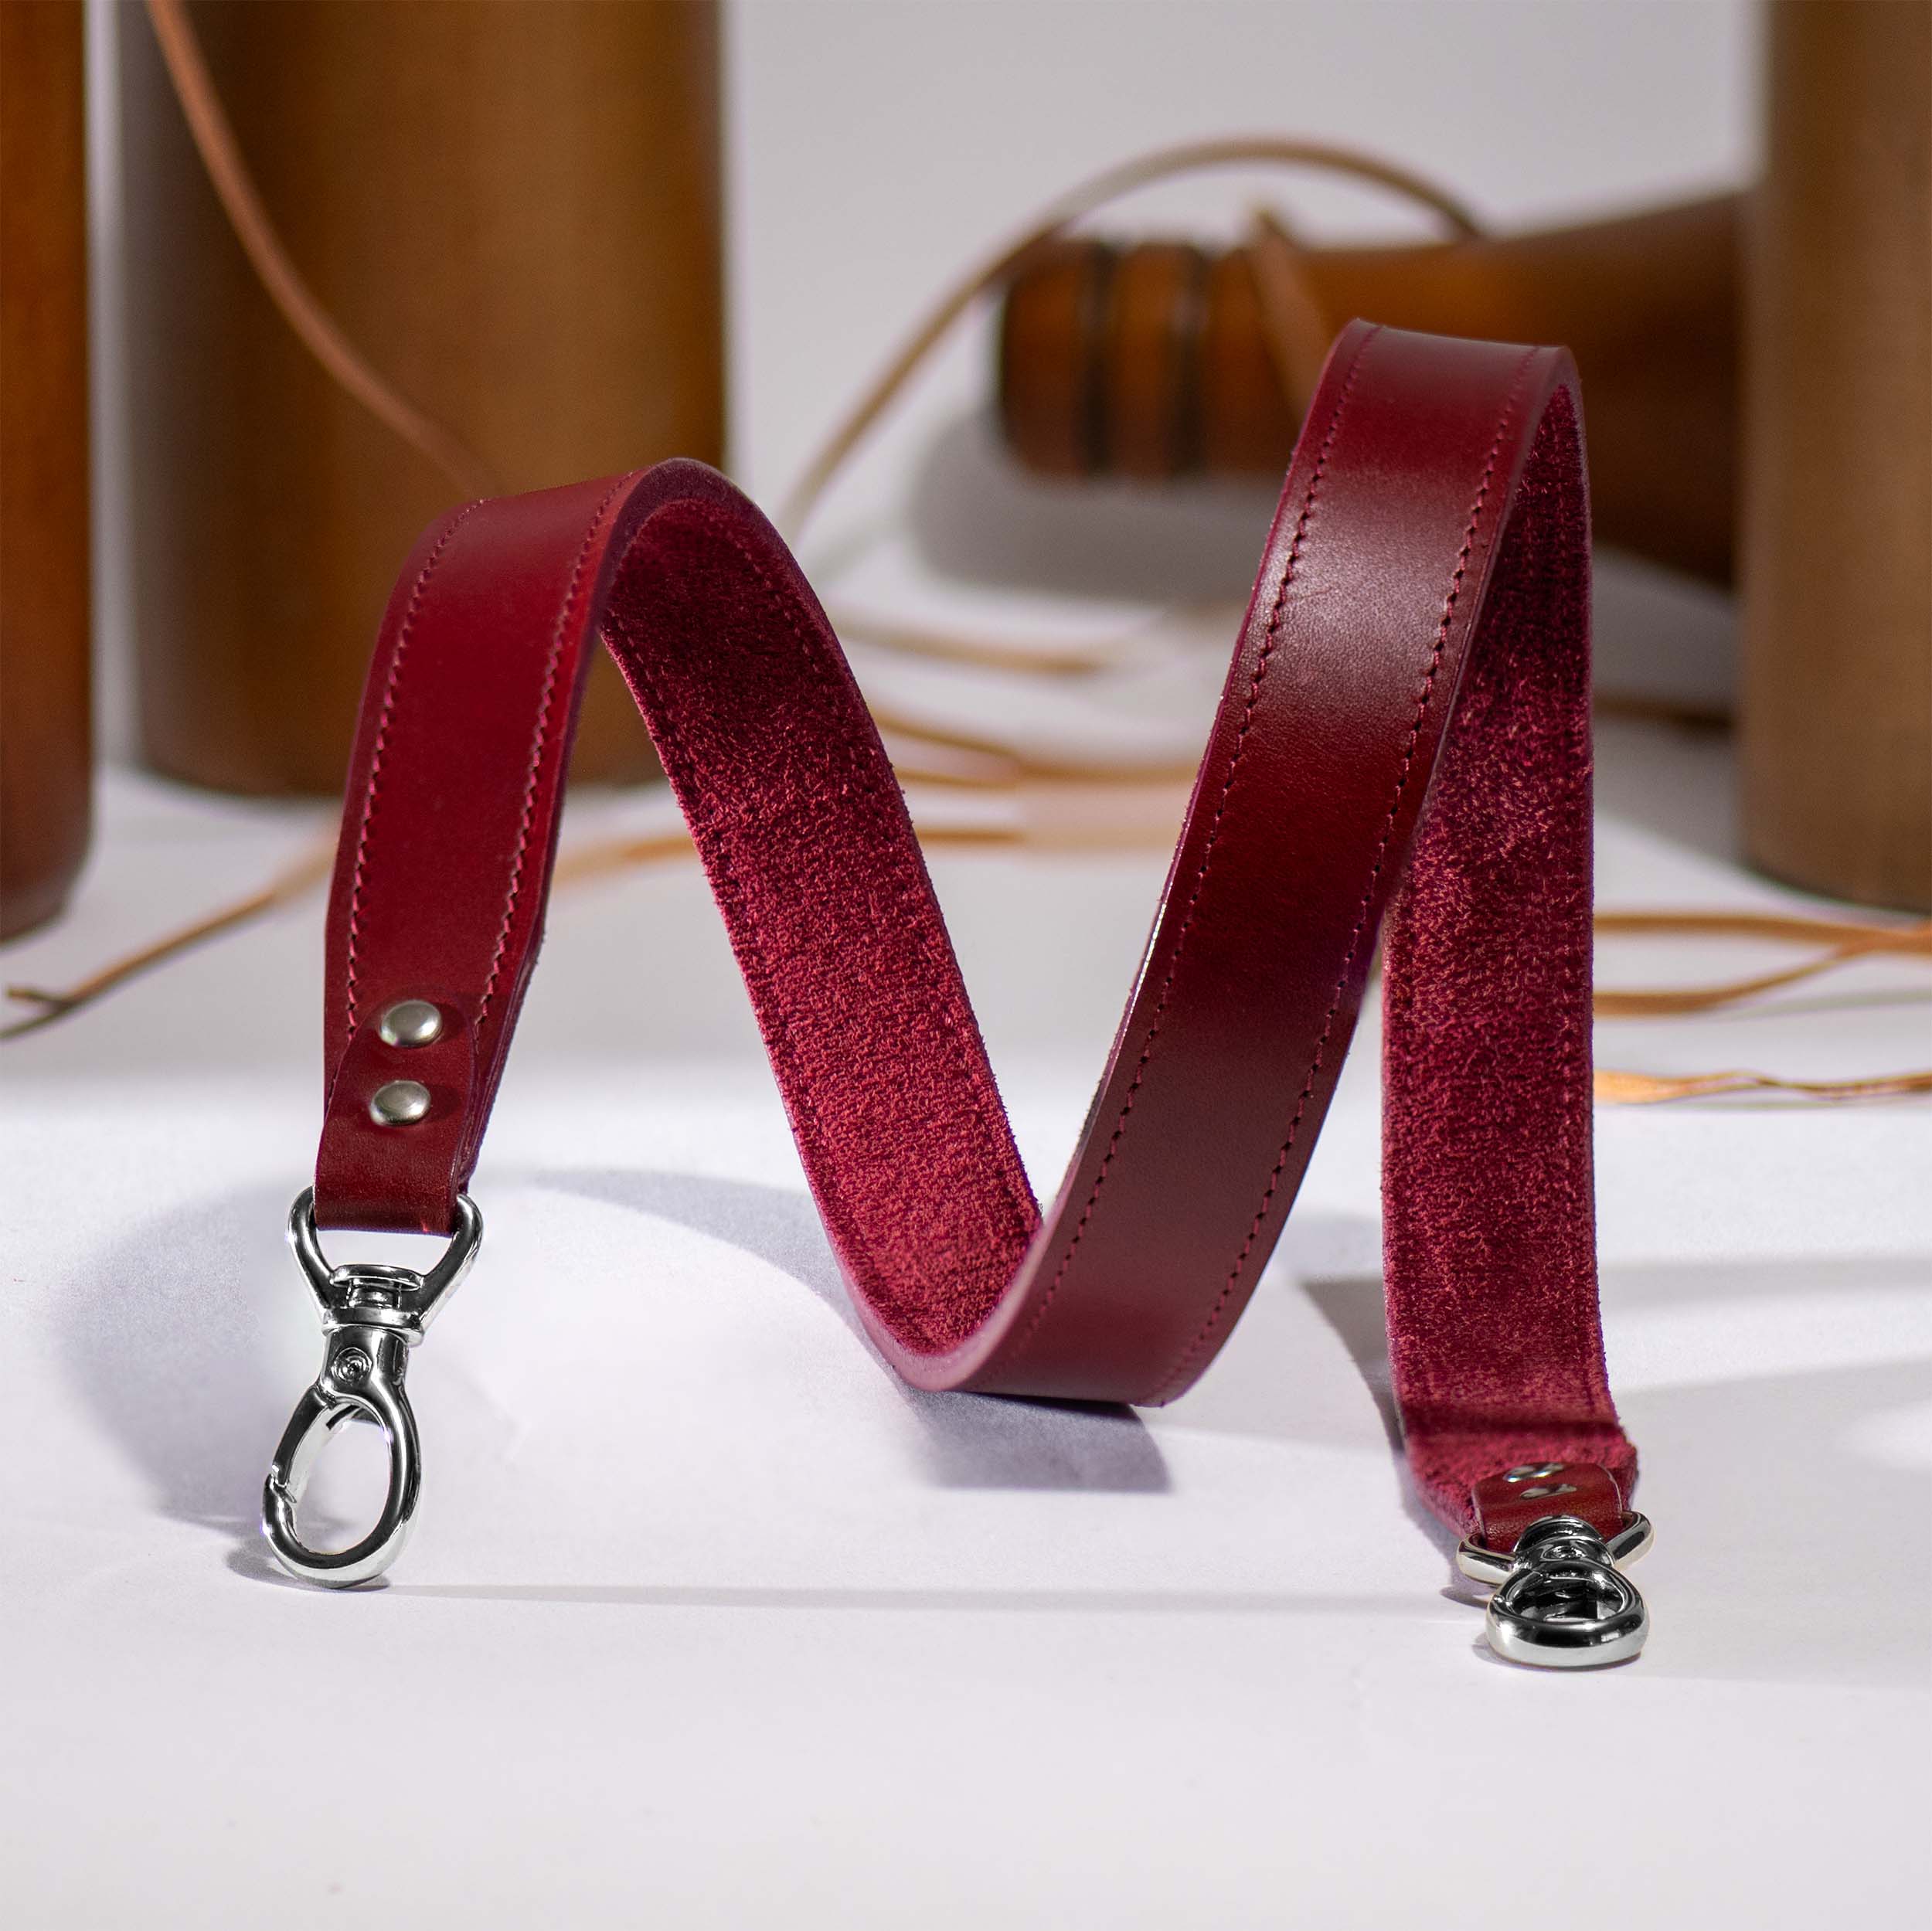 1 Pair 30cm Leather Purse Handles Leather Bag Handbag Straps Shoulder Bag  Strap Replacement DIY Strap with and Rivets Claret' : Amazon.in: Shoes &  Handbags